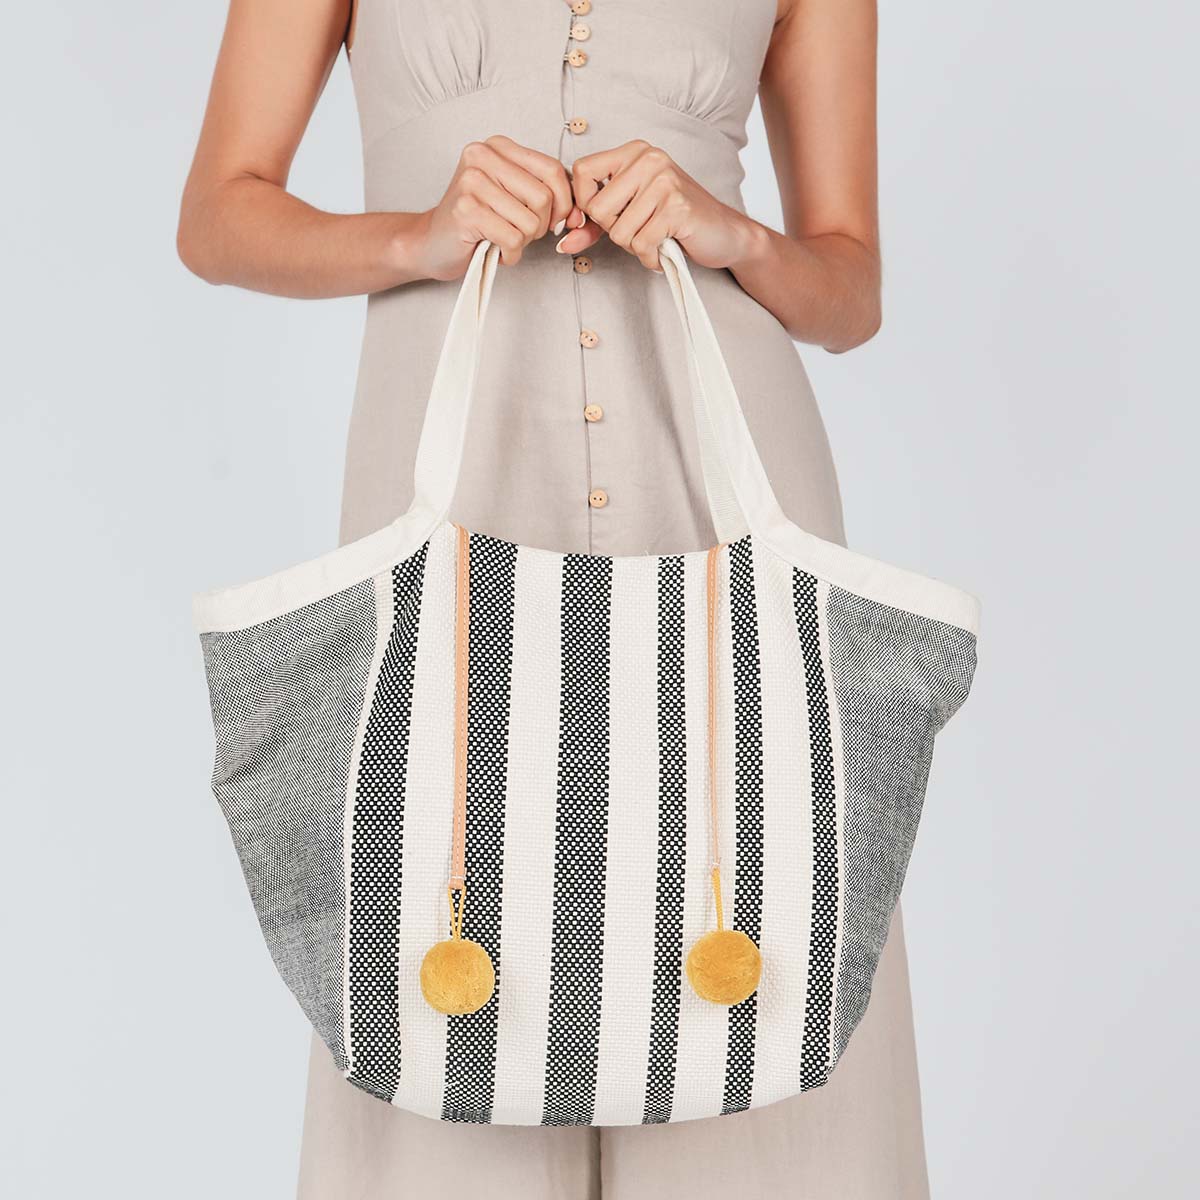 A model holds the hand woven artisan Rosa Tote in a Tourmalline pattern.